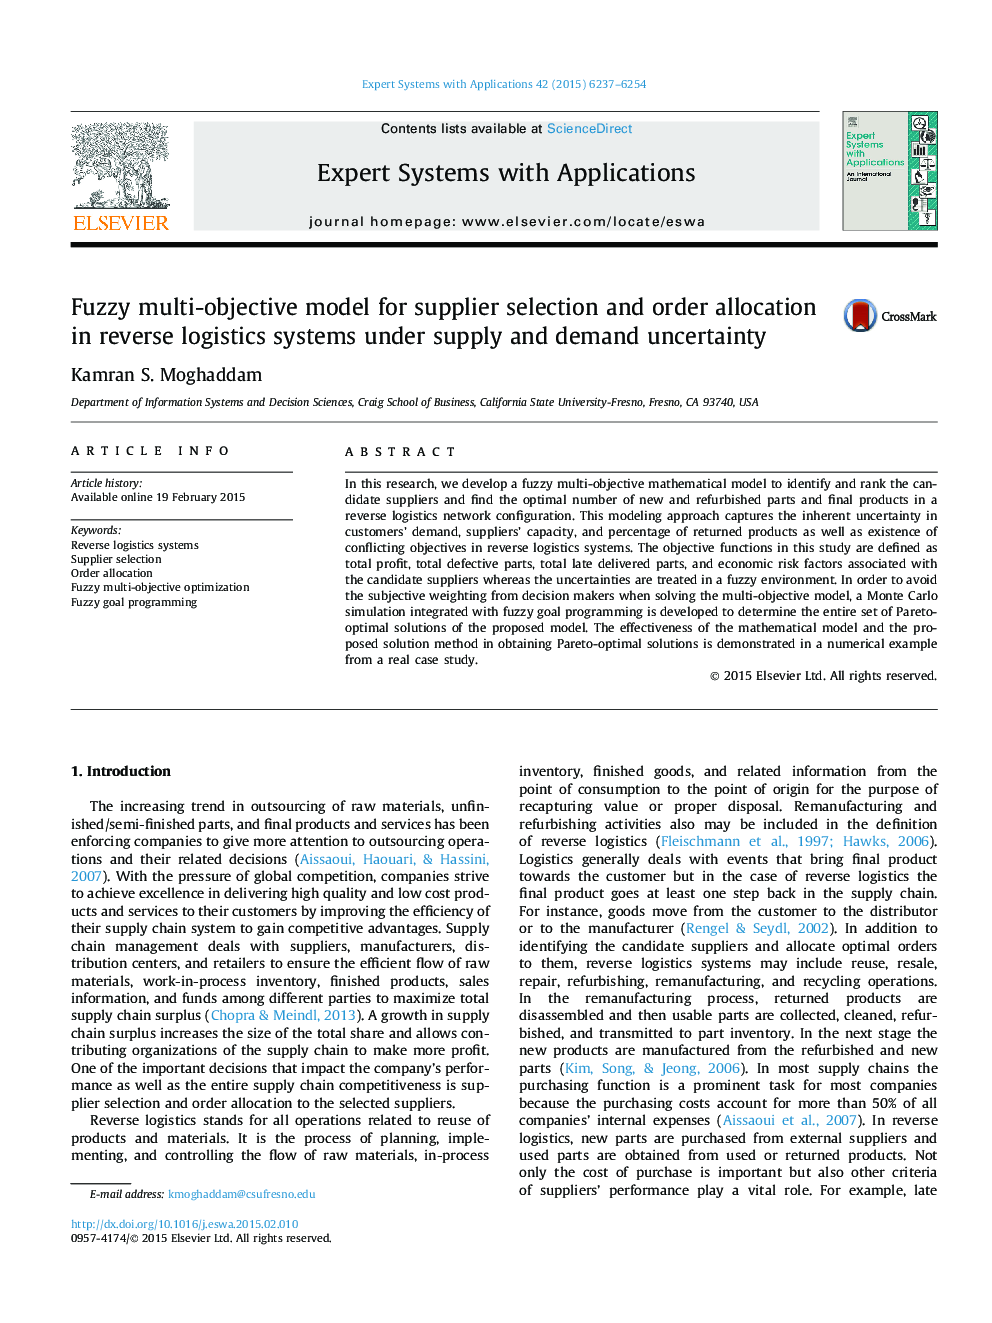 Fuzzy multi-objective model for supplier selection and order allocation in reverse logistics systems under supply and demand uncertainty